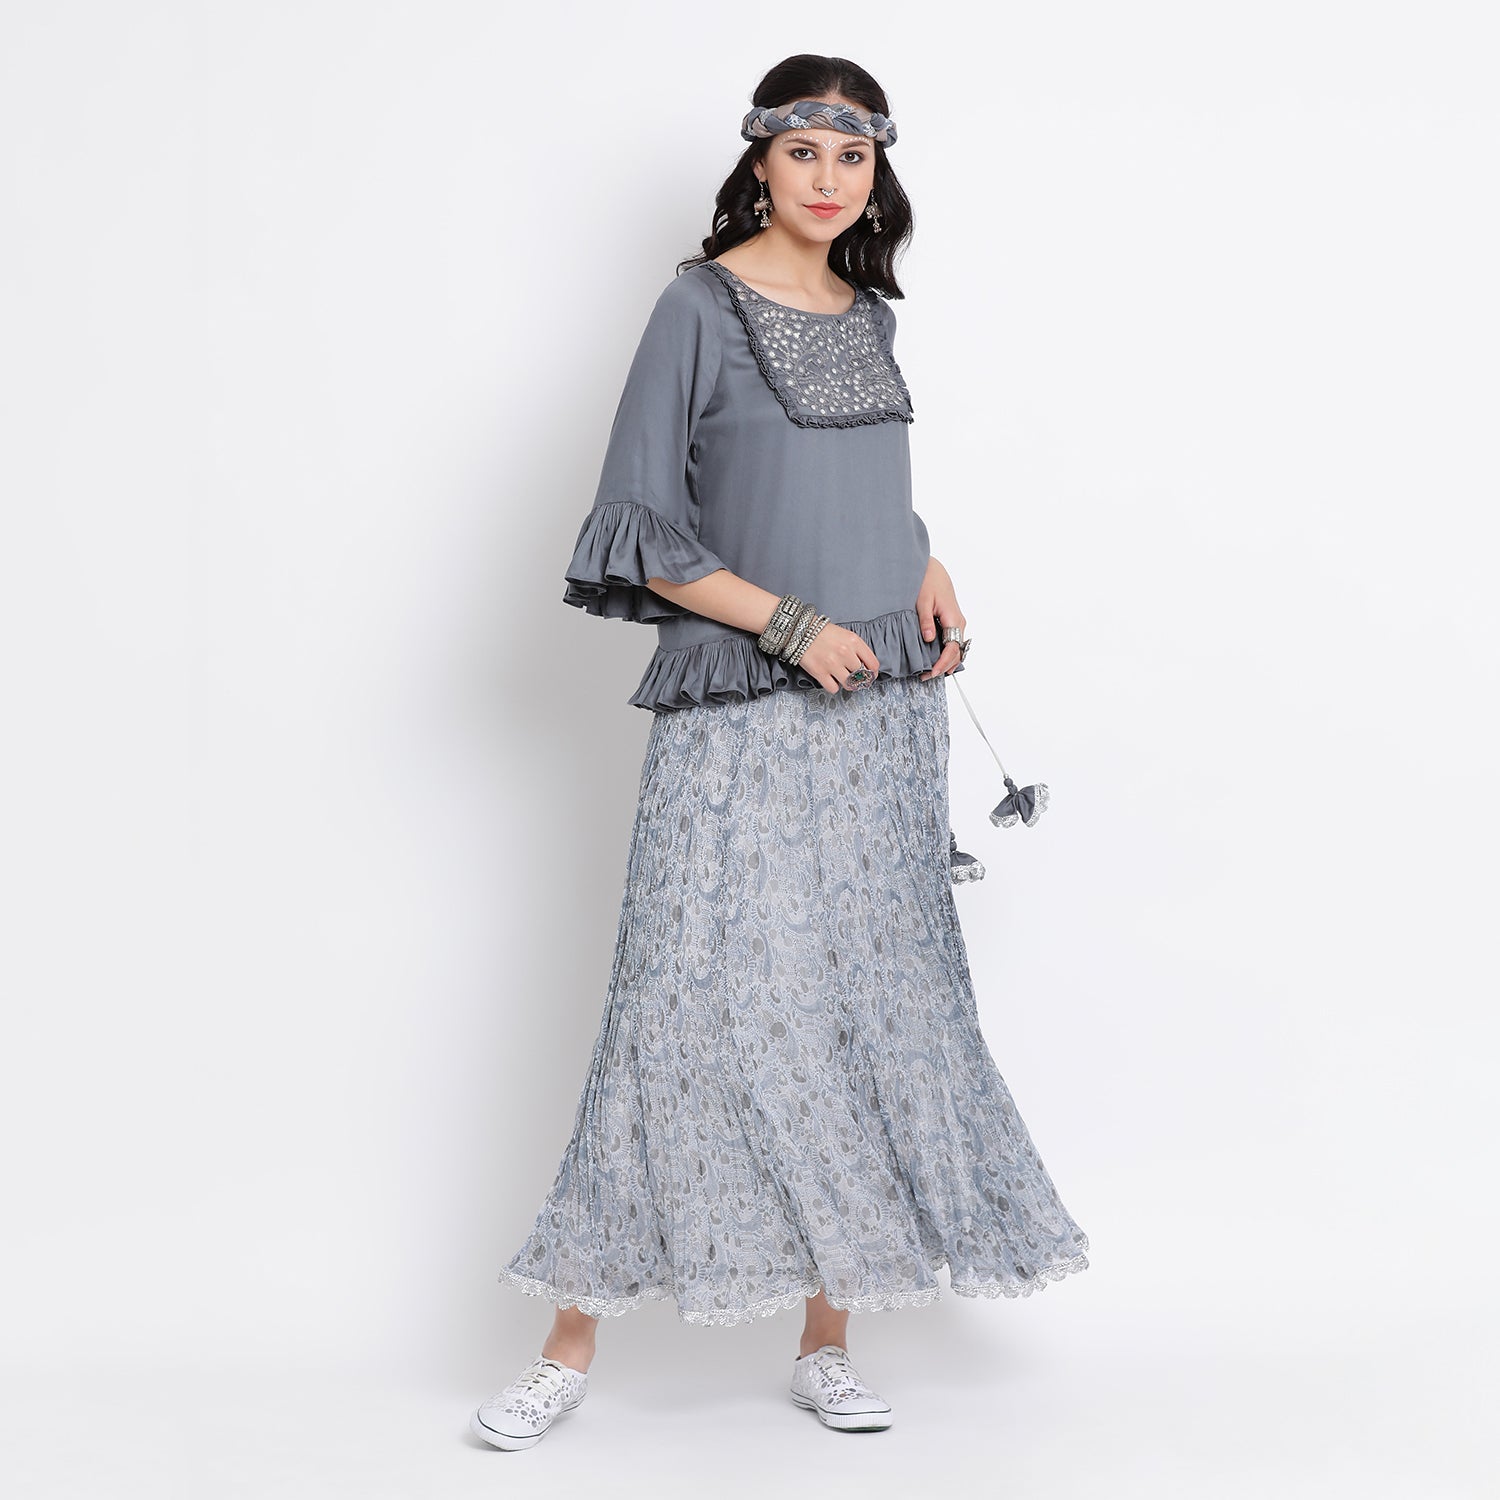 Blue flower printed chiffon crinkle skirt with lace